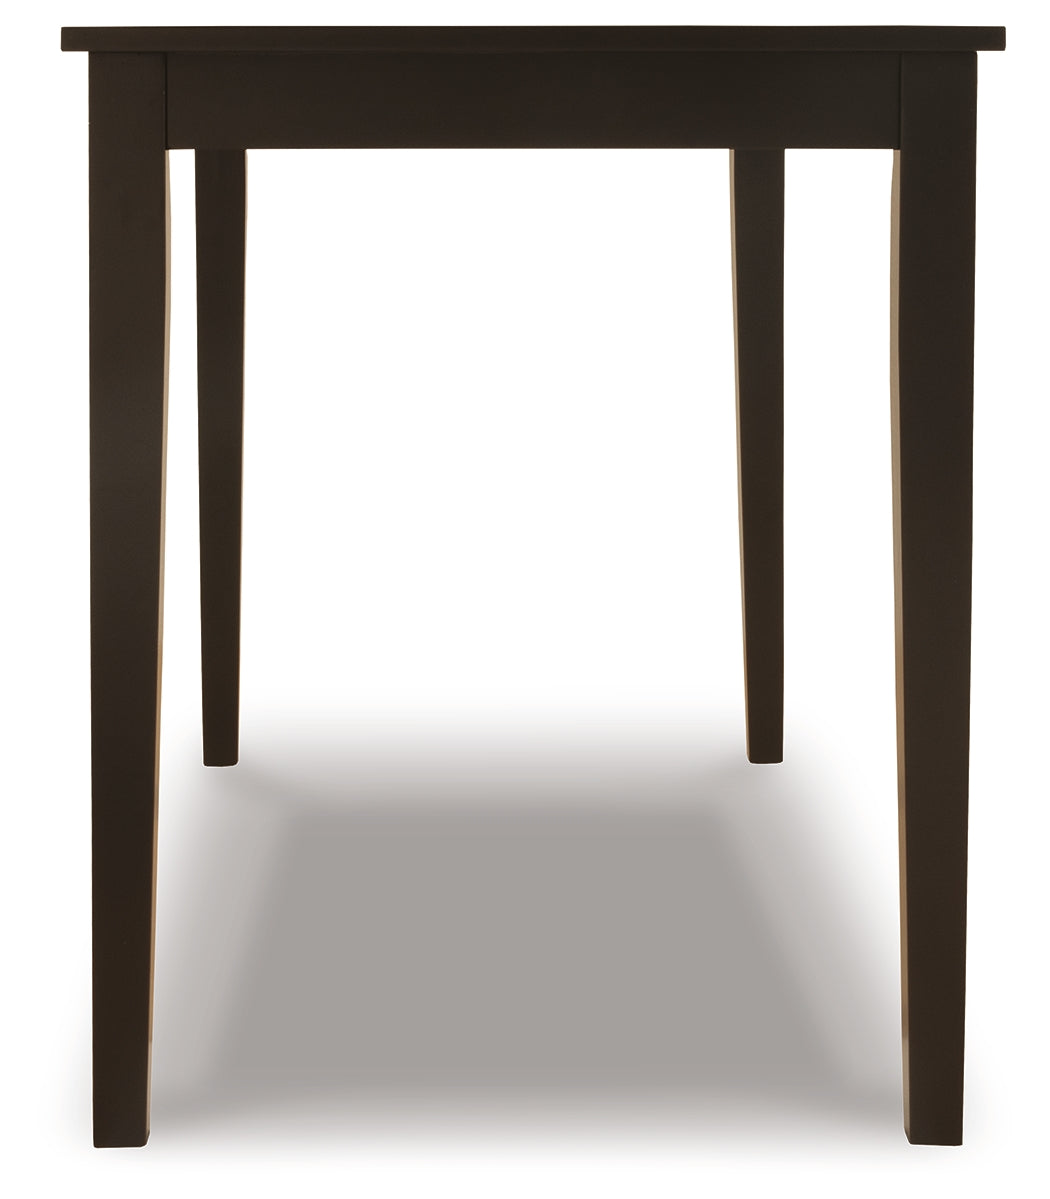 Dark Brown Kimonte Dining Table and 4 Chairs - PKG013926